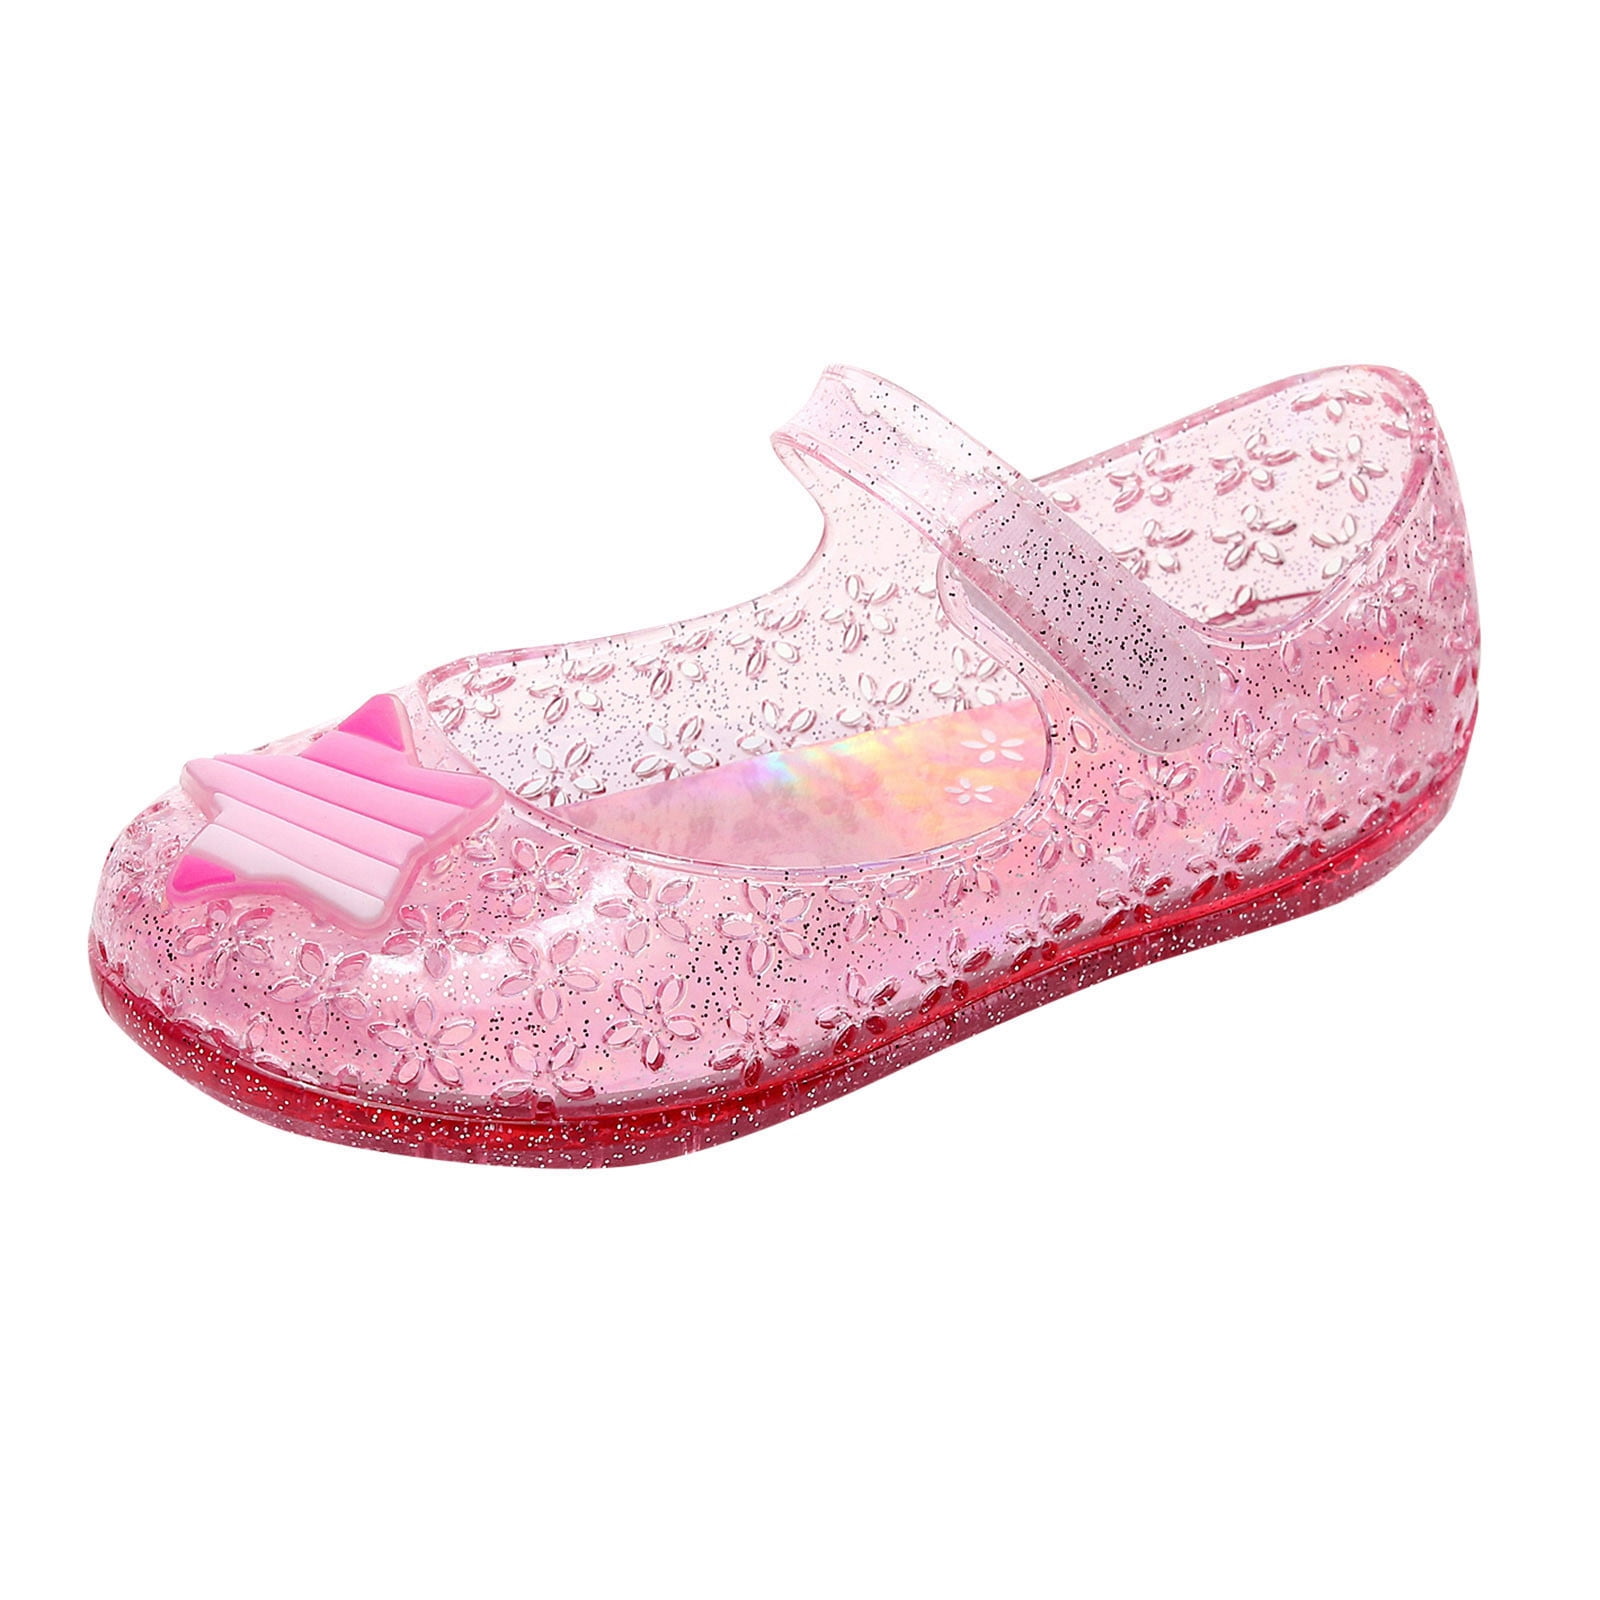 Princess Shoes Girls Sandals Jelly Mary Jane Dance Party Shoes For Kids ...